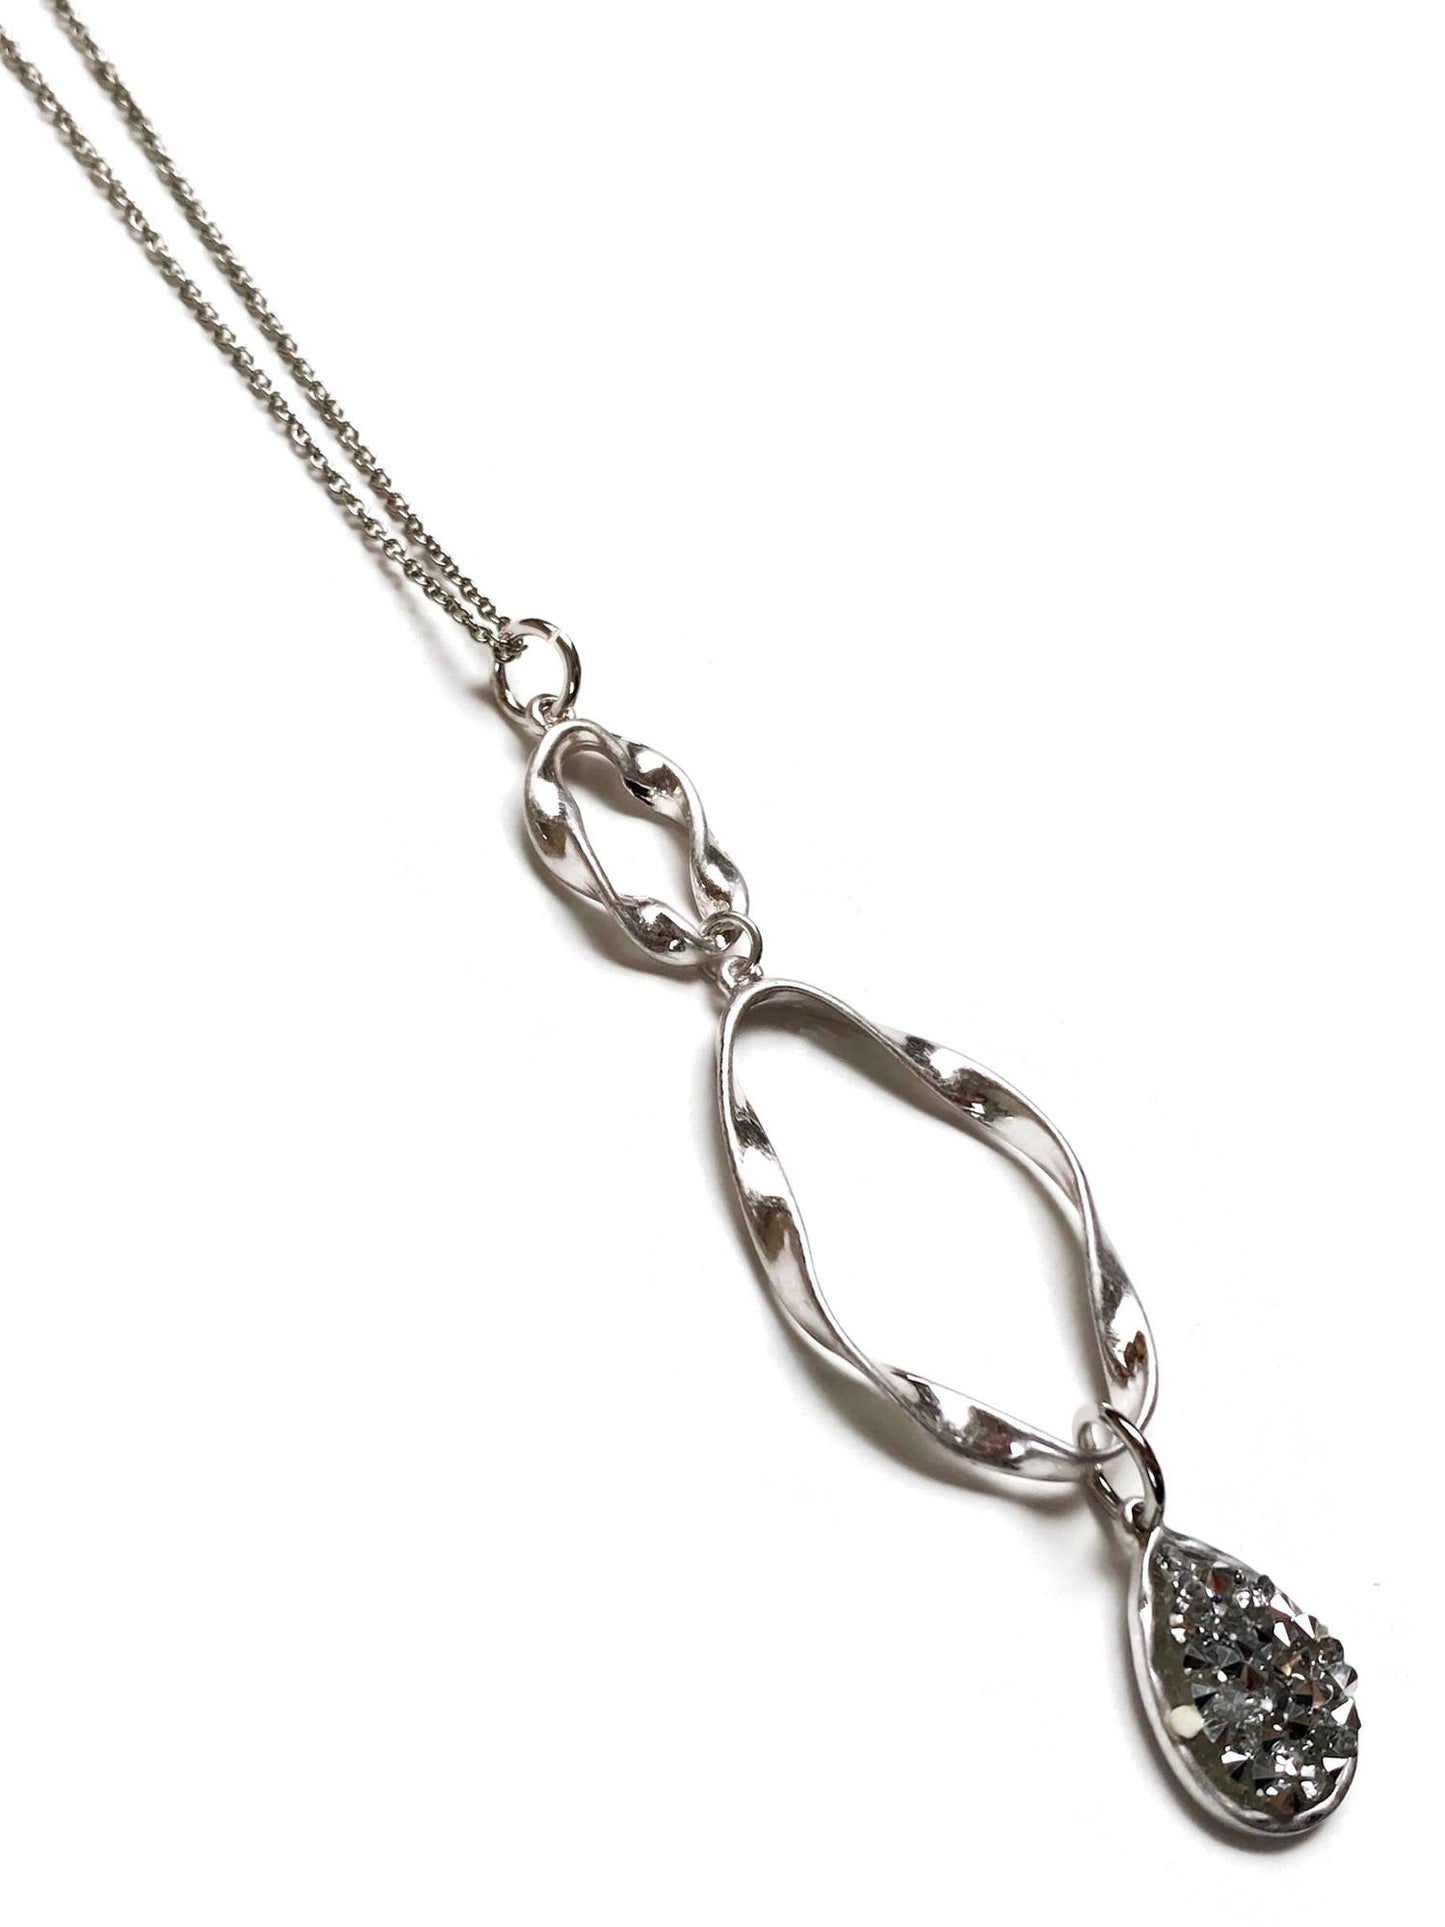 Gracie Rose Designs - Matte Silver Twisted Ribbons Crystals Pendant Necklace